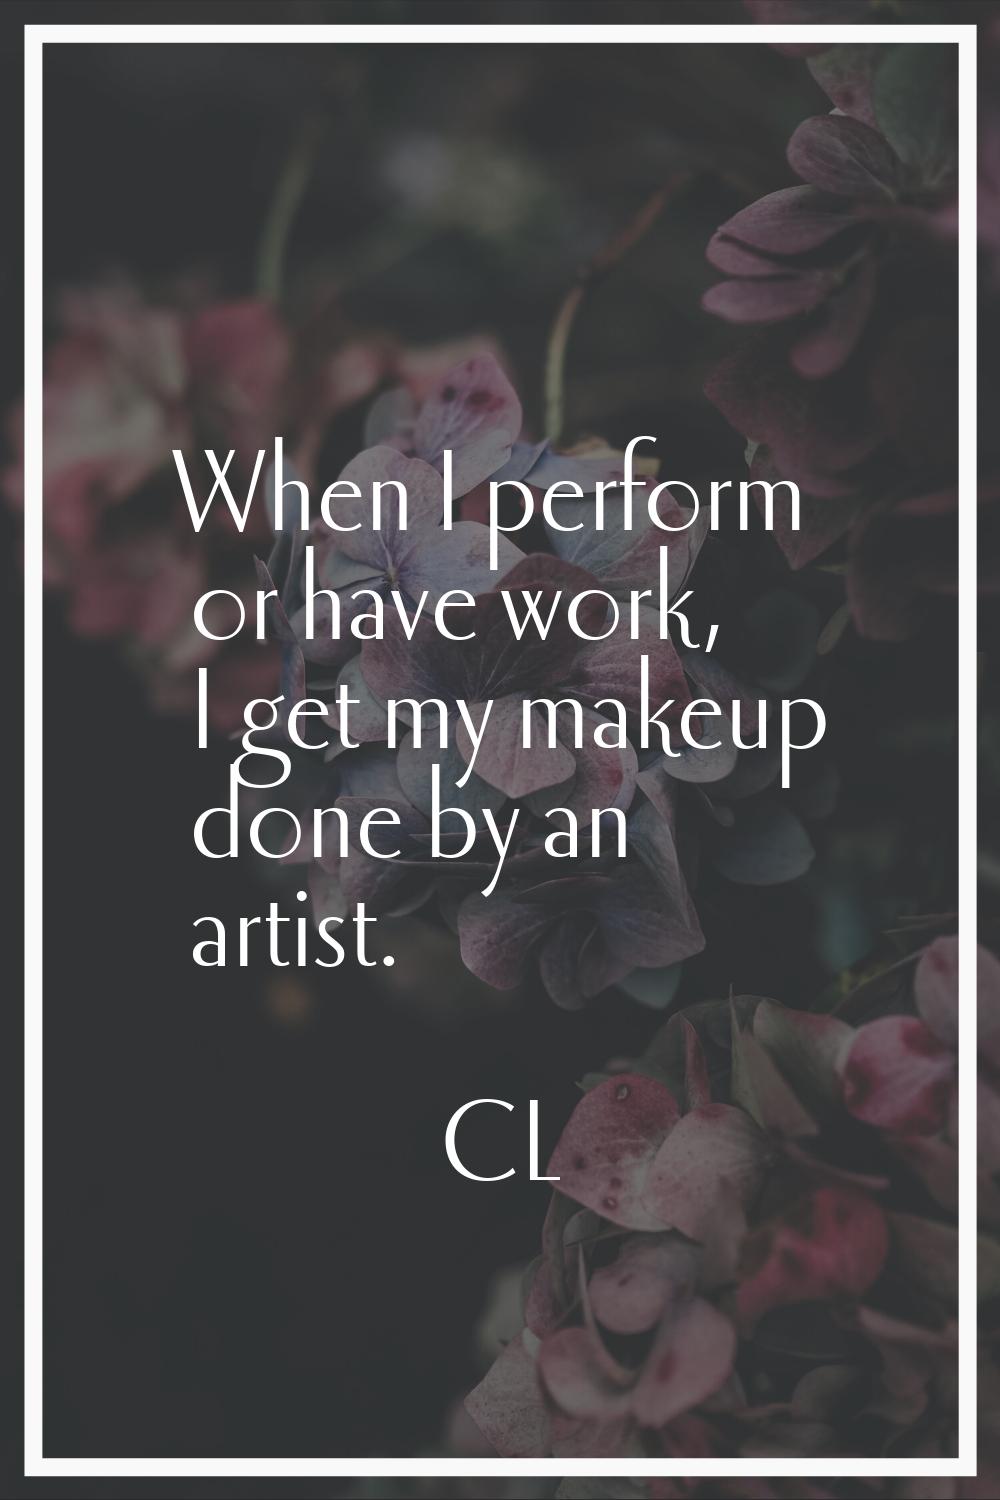 When I perform or have work, I get my makeup done by an artist.